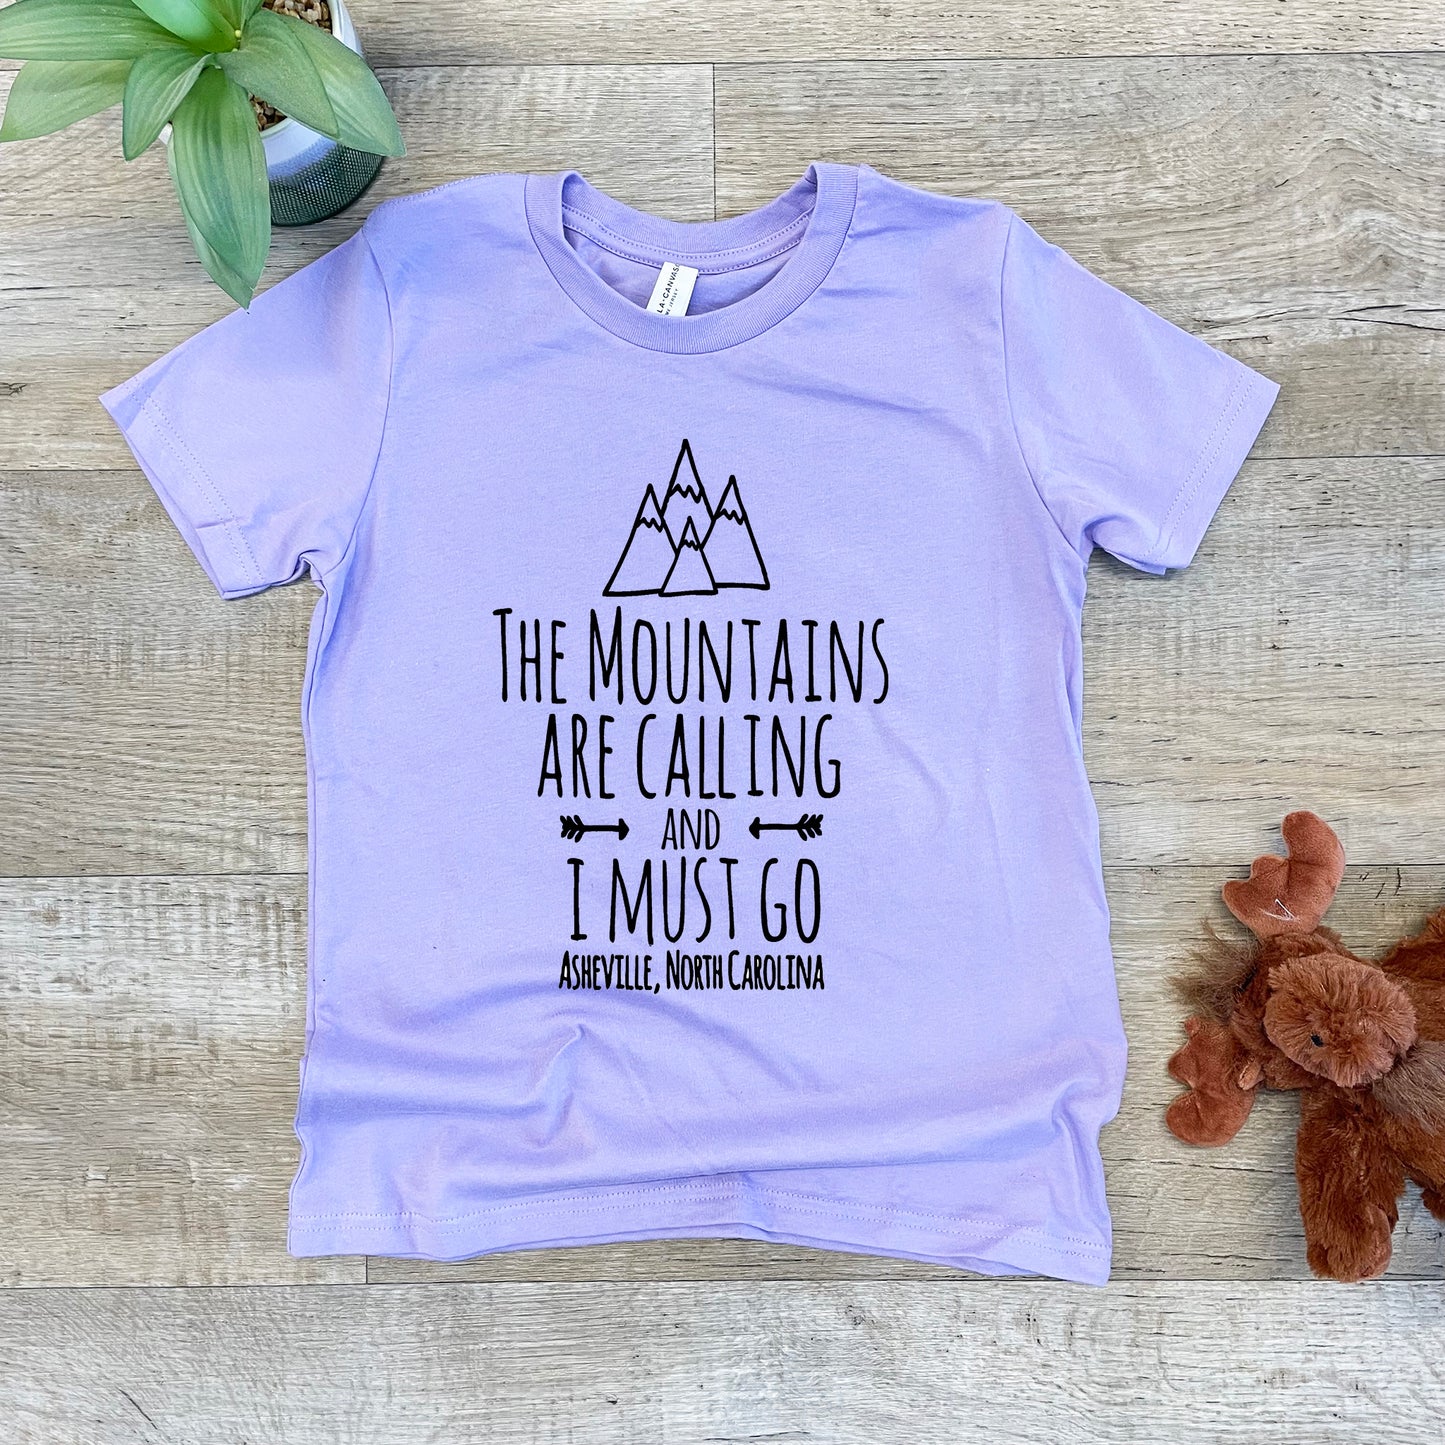 The Mountains Are Calling And I Must Go, Asheville North Carolina - Kid's Tee - Columbia Blue or Lavender